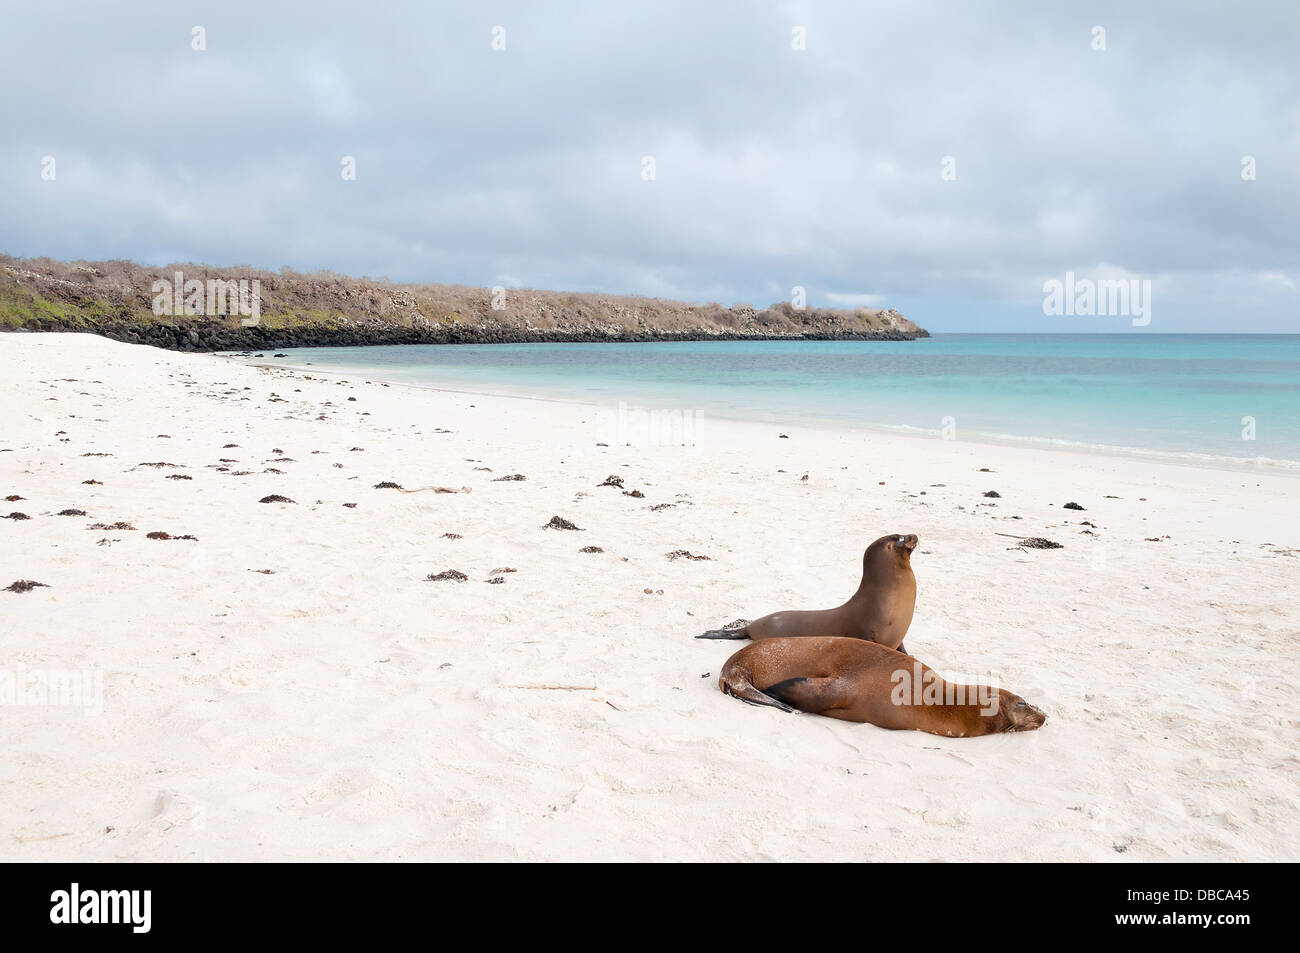 Espanola Island, Galapagos, with two sea-lions in the foreground Stock Photo